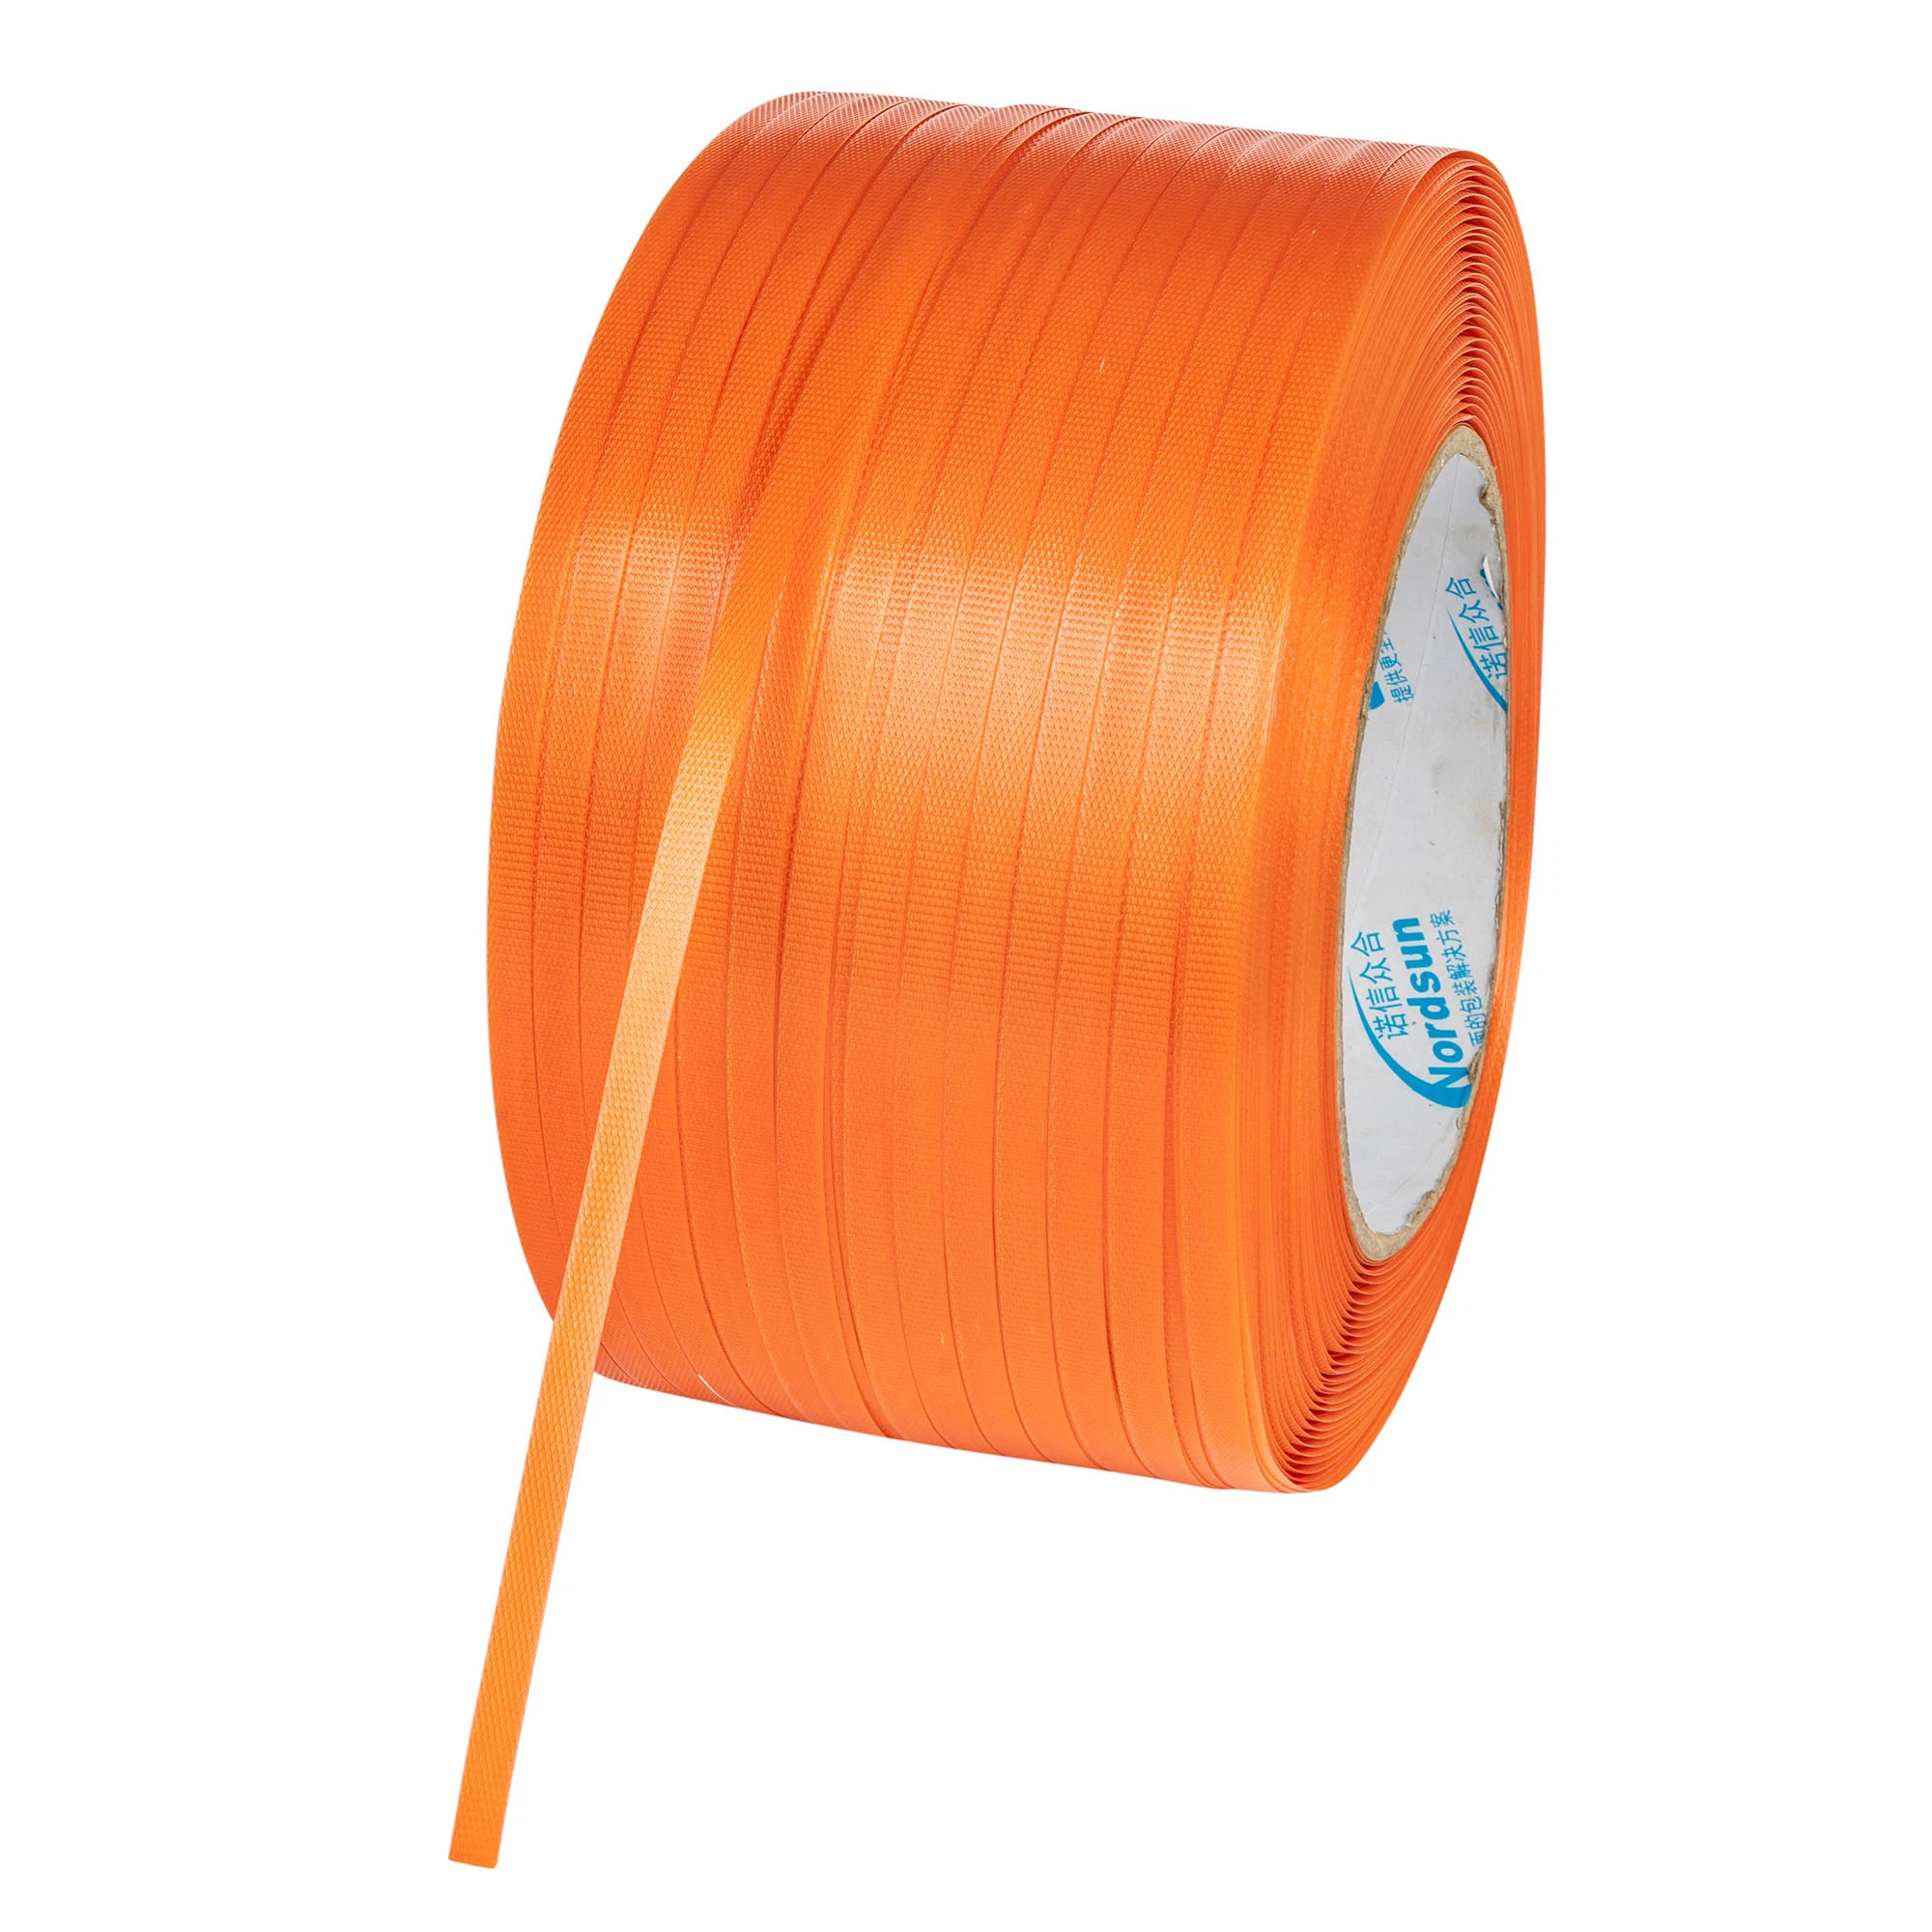 Factory Manufacturer Supply Distribution Custom PP Strap High quality/High cost performance  Band PP Strapping Band Plastic PP Belt